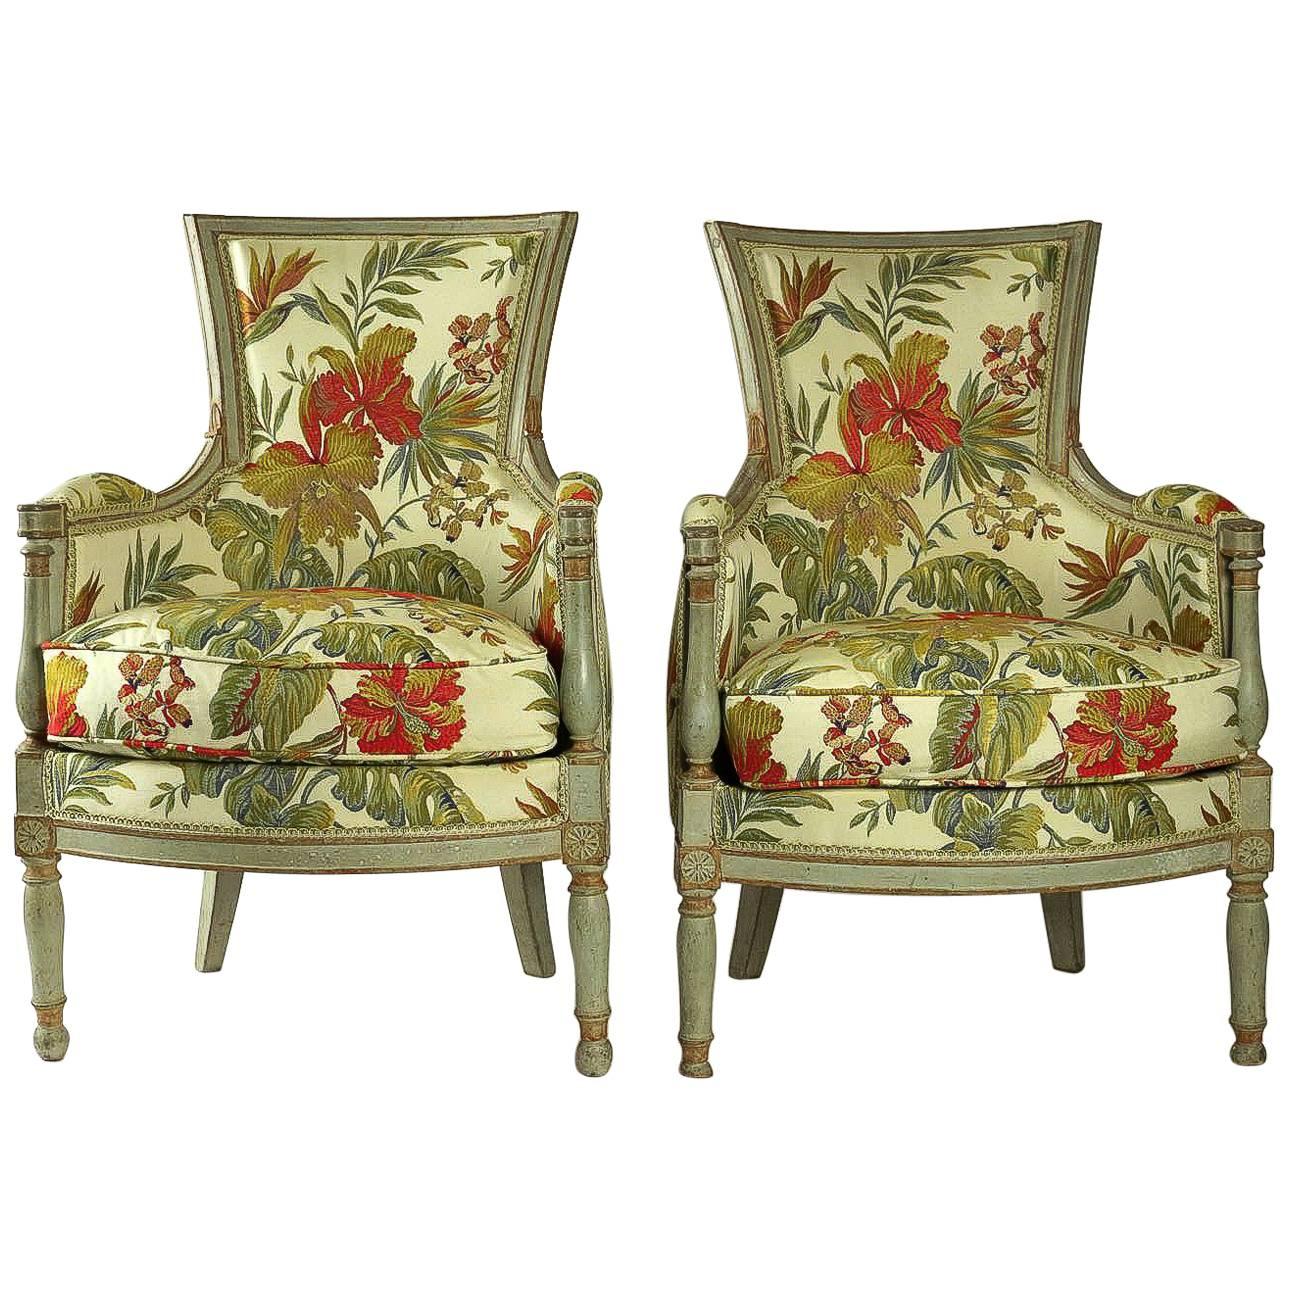 French Directoire Period Pair of Bergeres, circa 1798